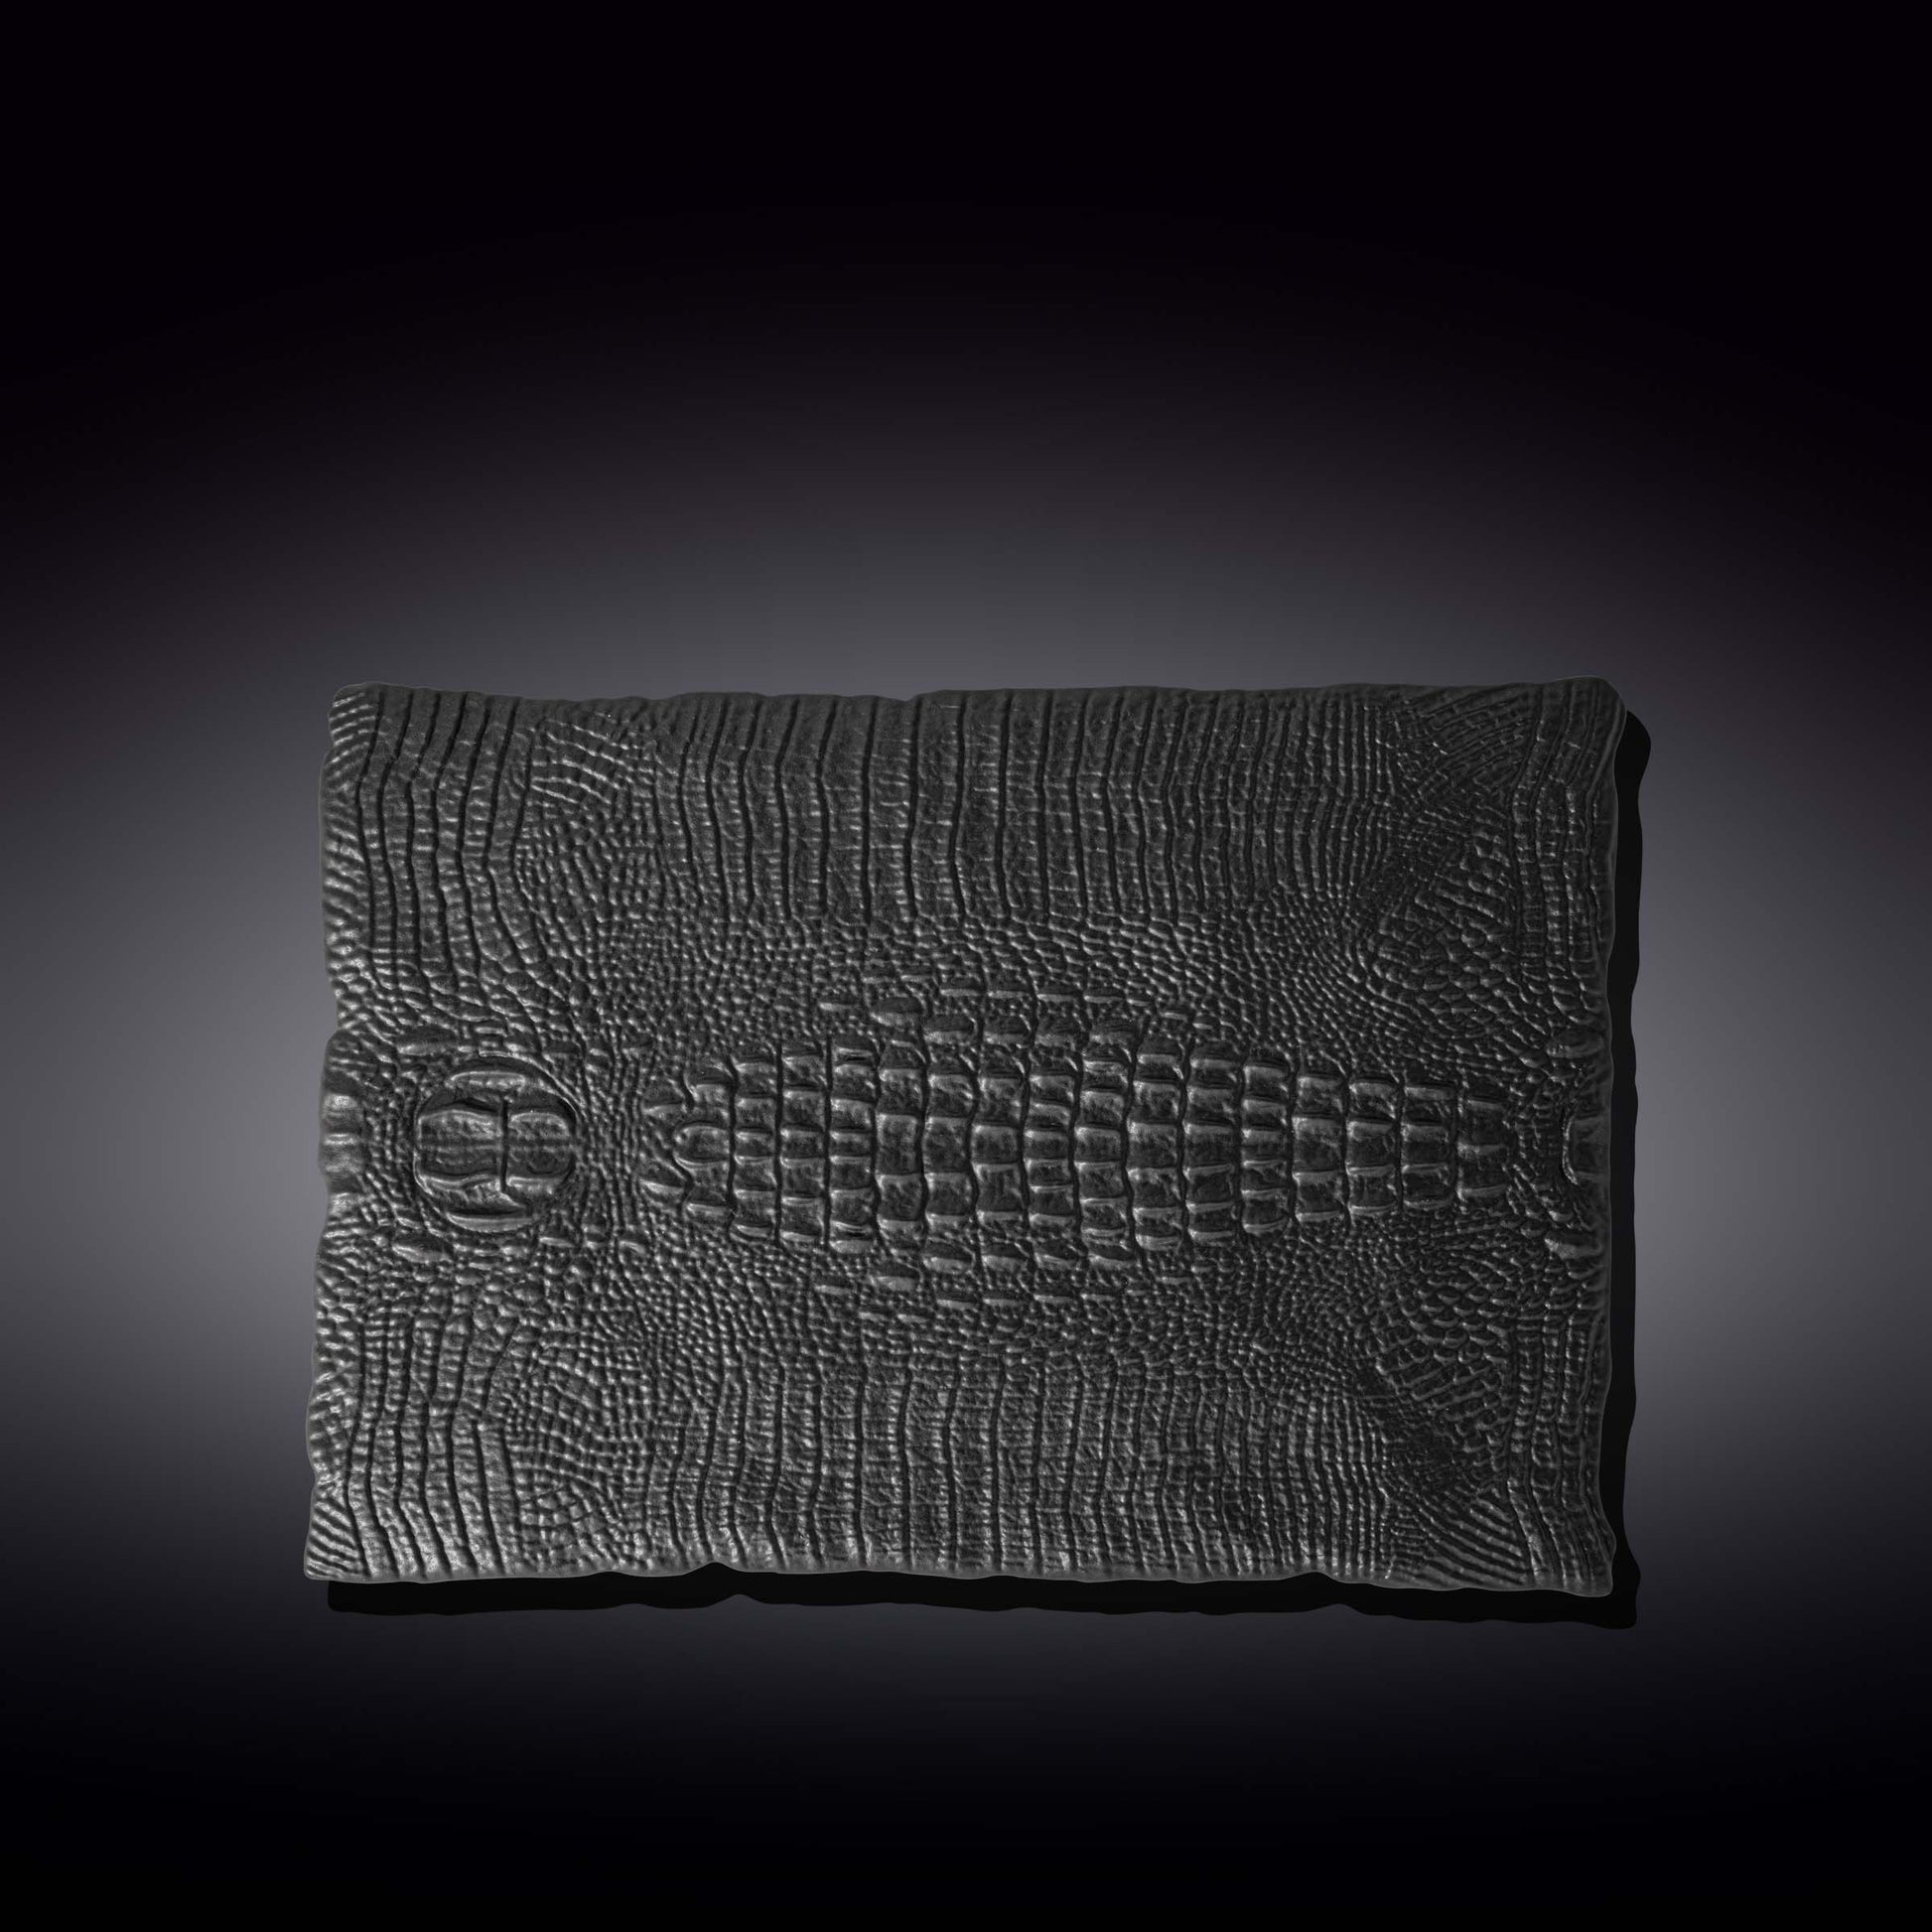 Set Of 2 Black Porcelain Slate look Rectangular Serving Dish With Crocodile Skin Texture. 11.75" inch X 8.25" inch-1